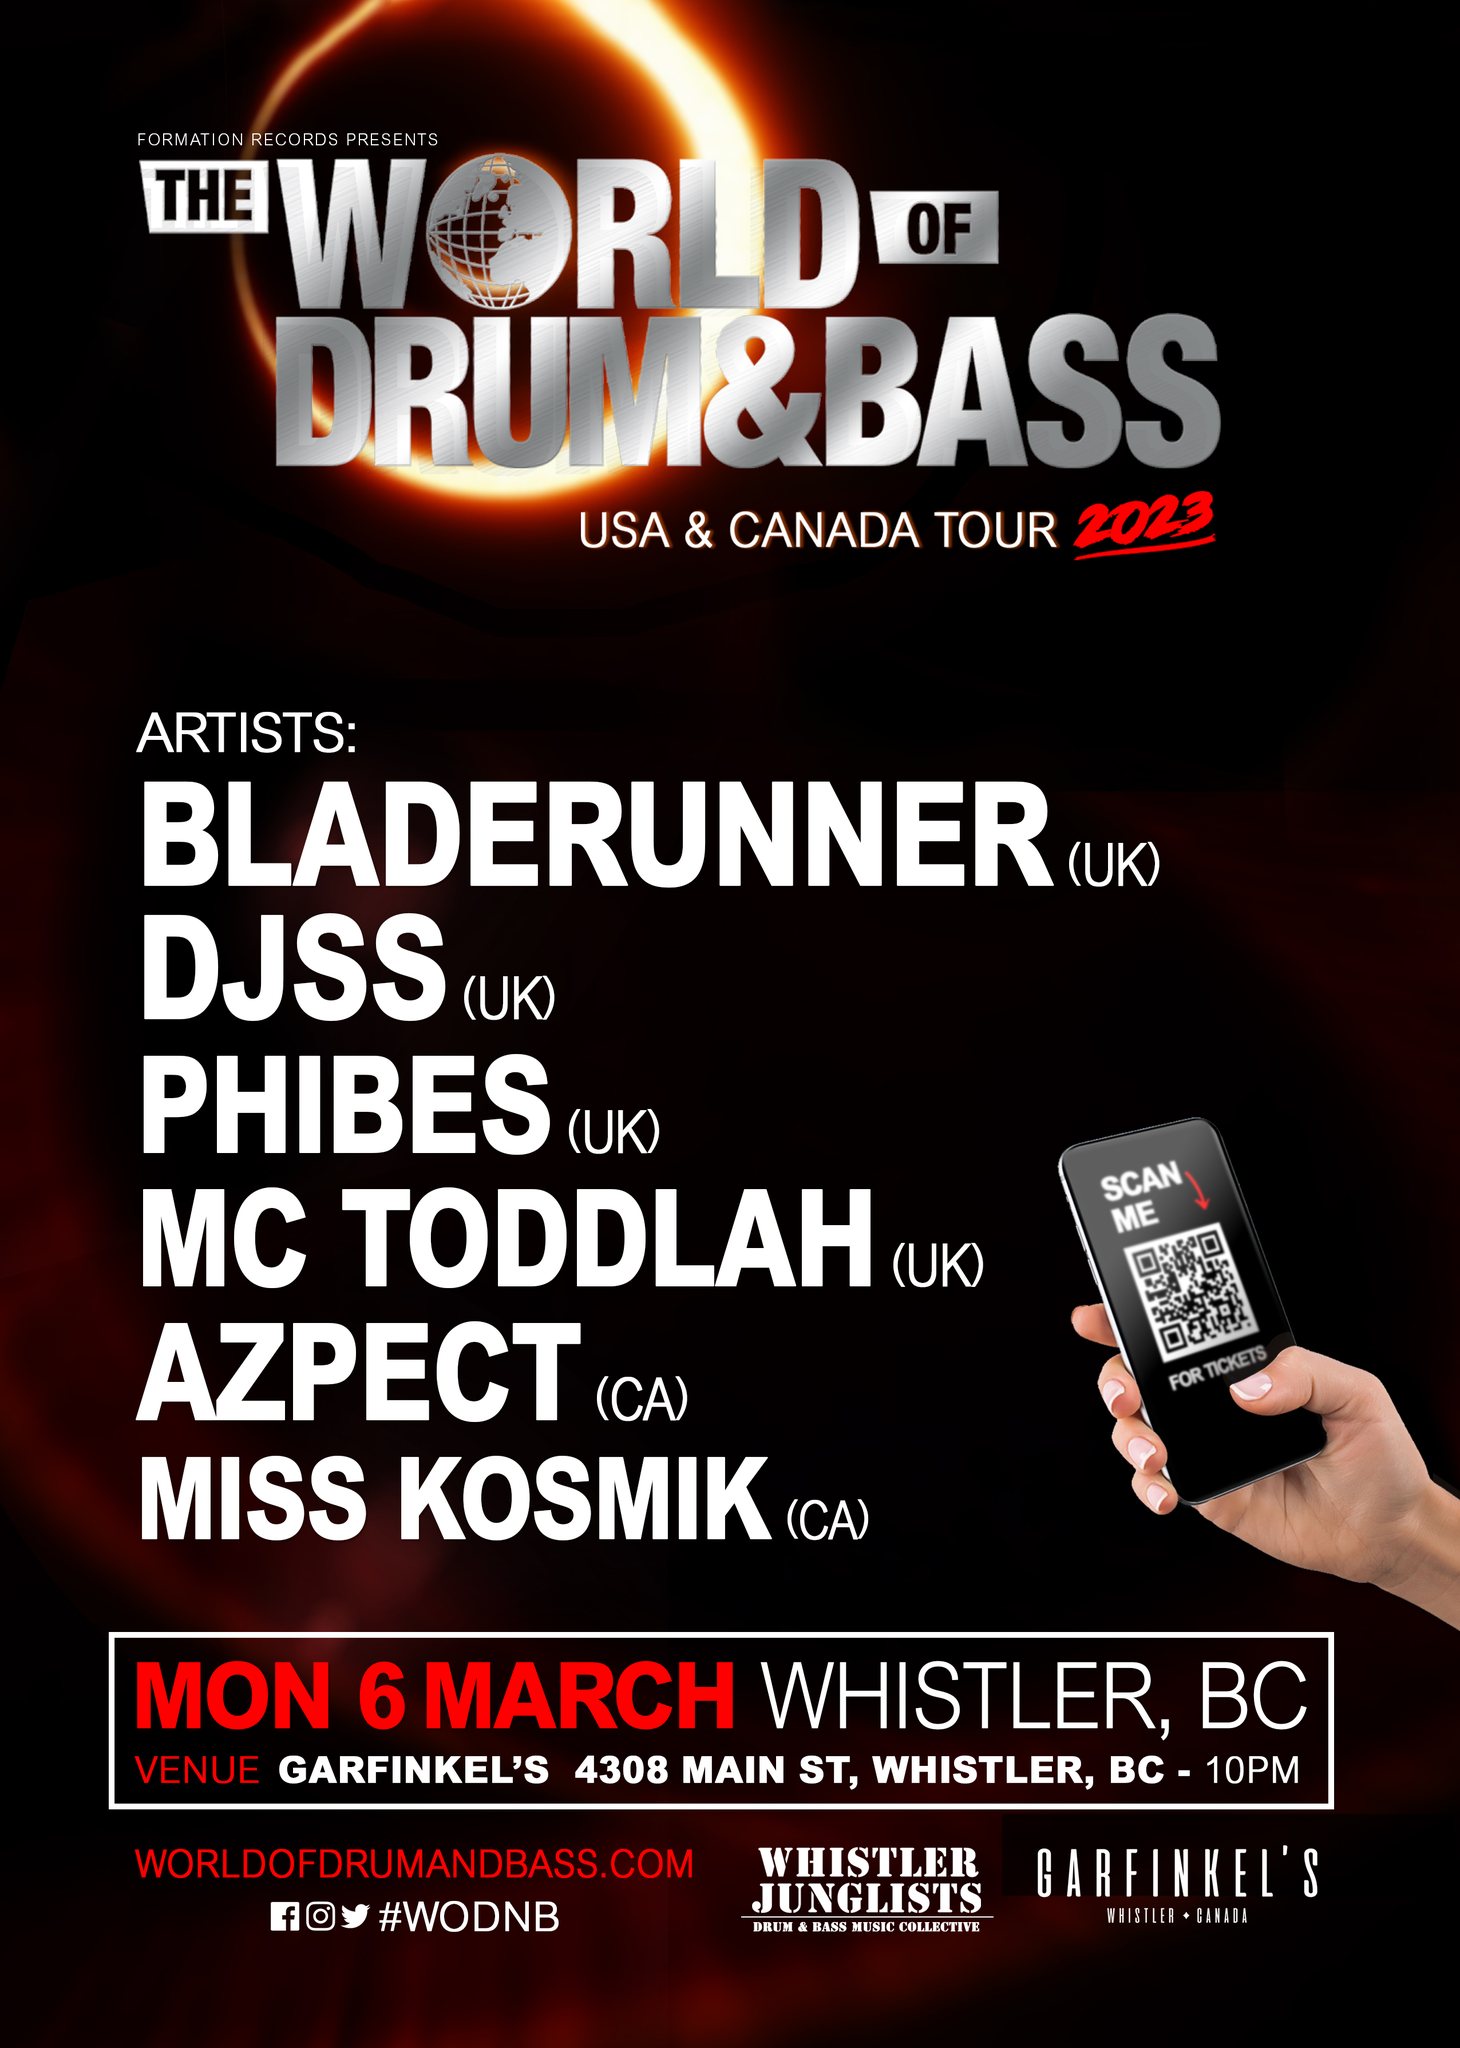 Miss Kosmik opens for the World of Drum & Bass Tour